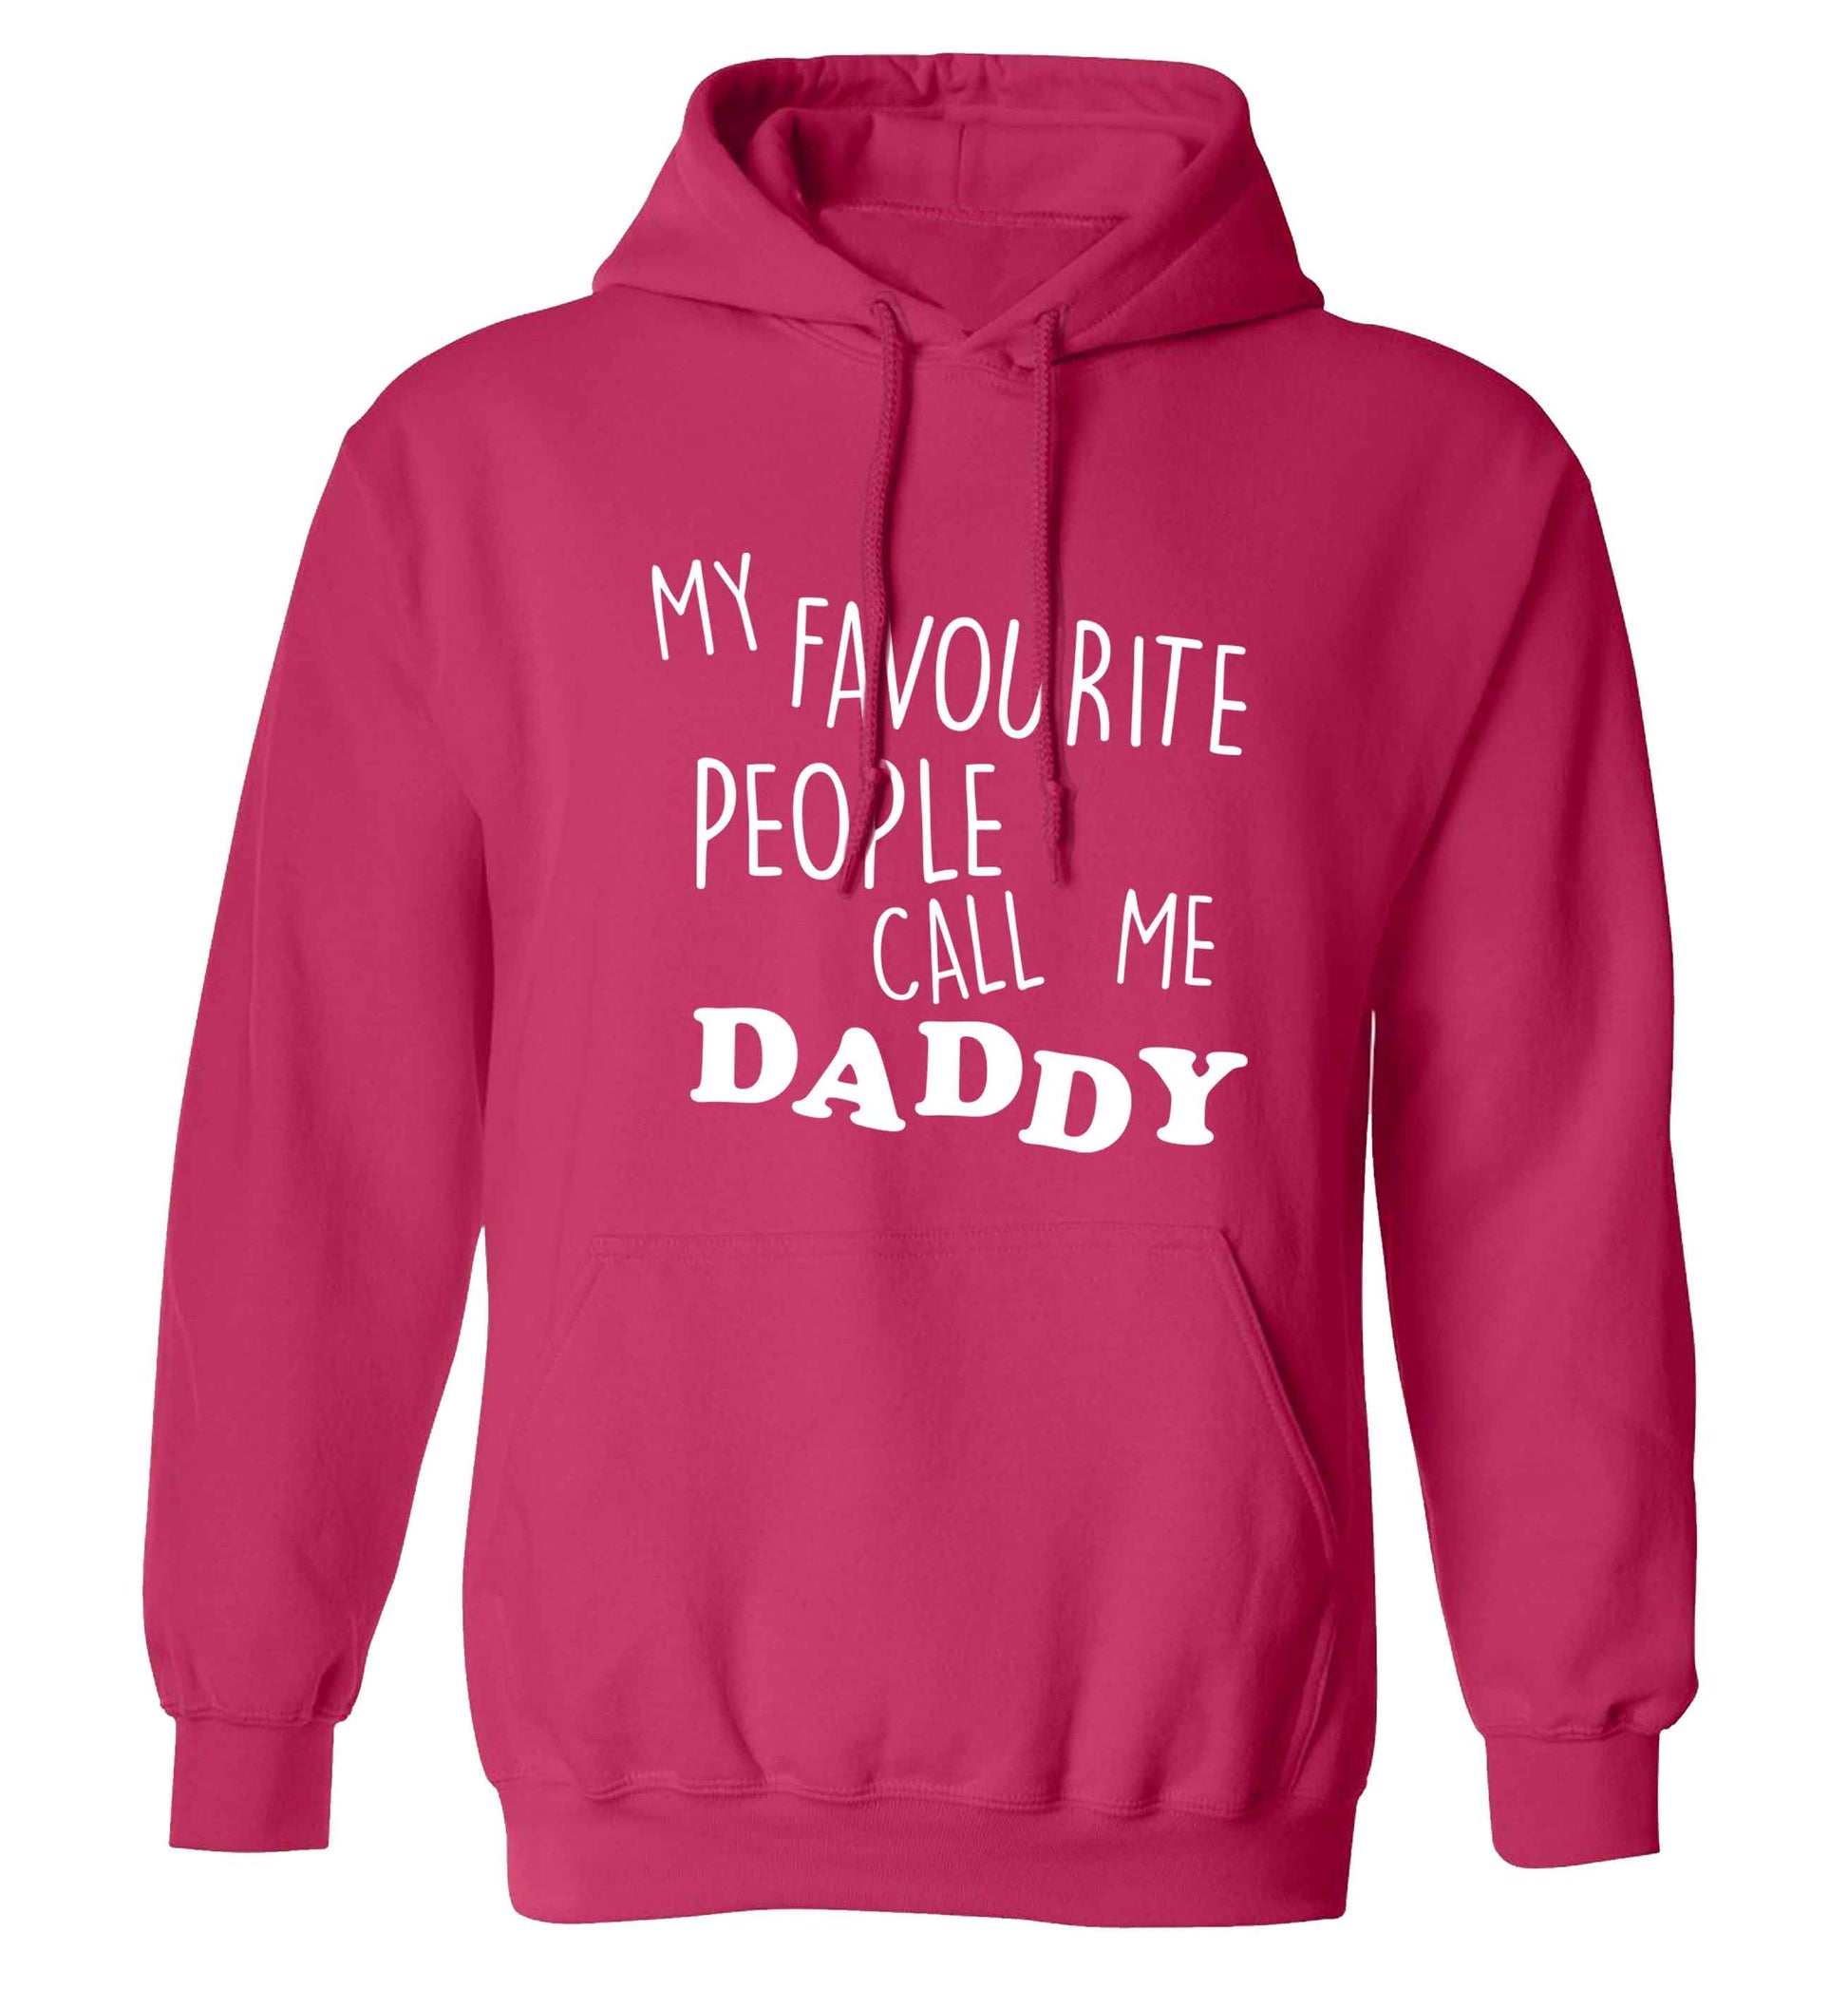 My favourite people call me daddy adults unisex pink hoodie 2XL